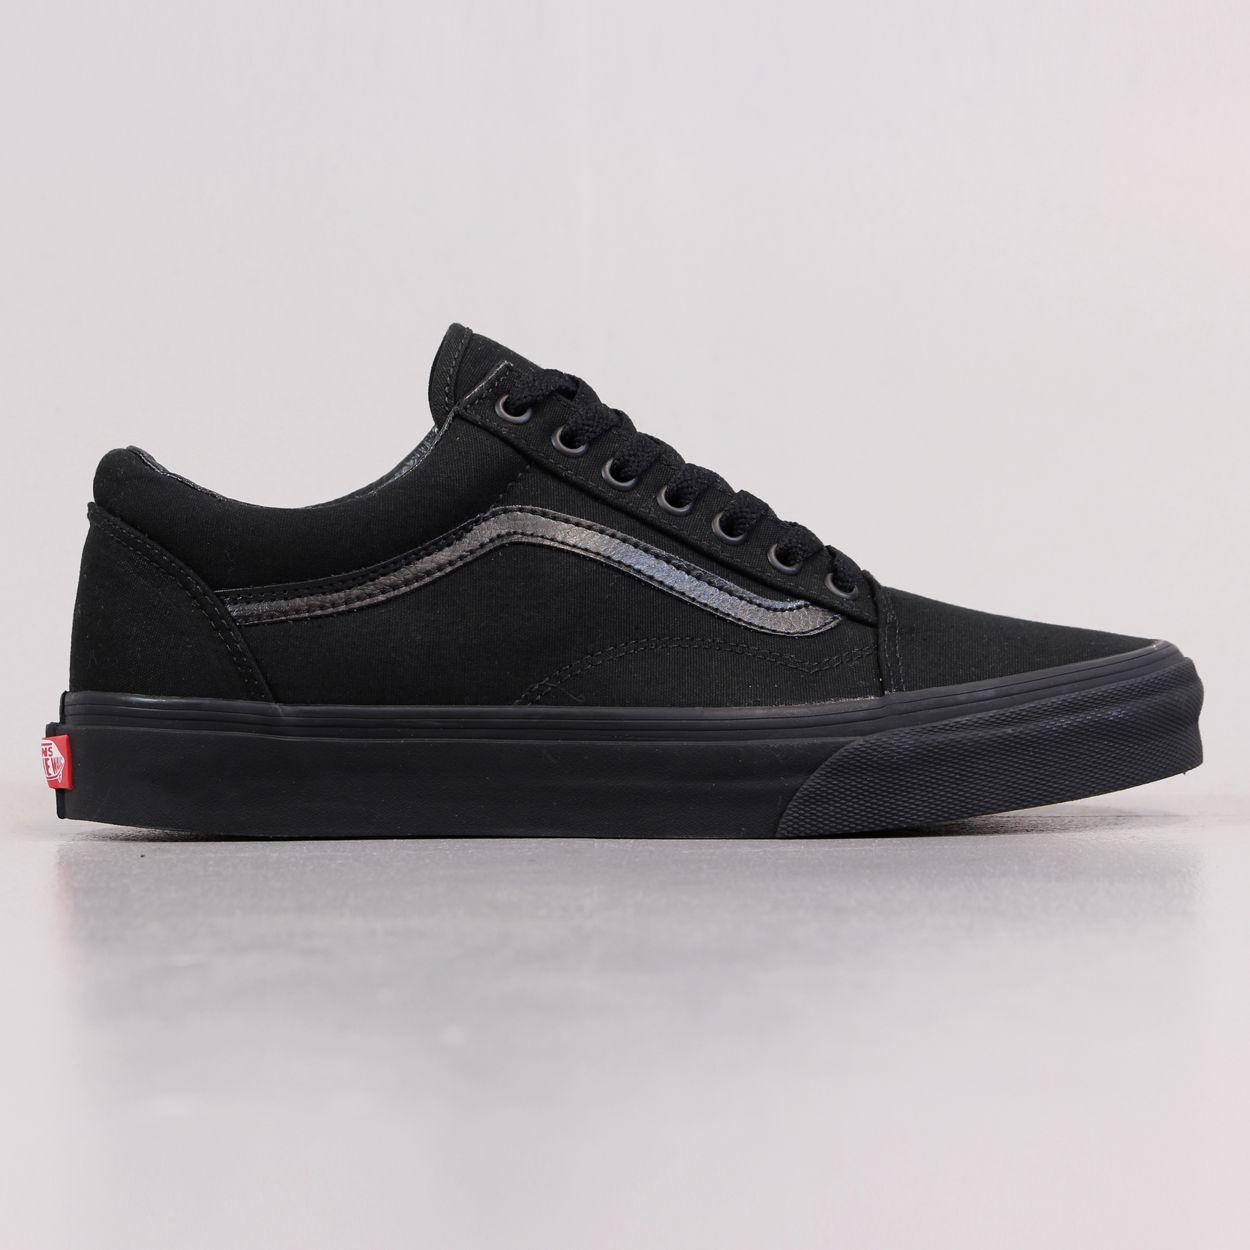 Off the Wall Vans Shoes Logo - Vans Off The Wall Old Skool Skateboarding Skate Shoes All Black W £41.25